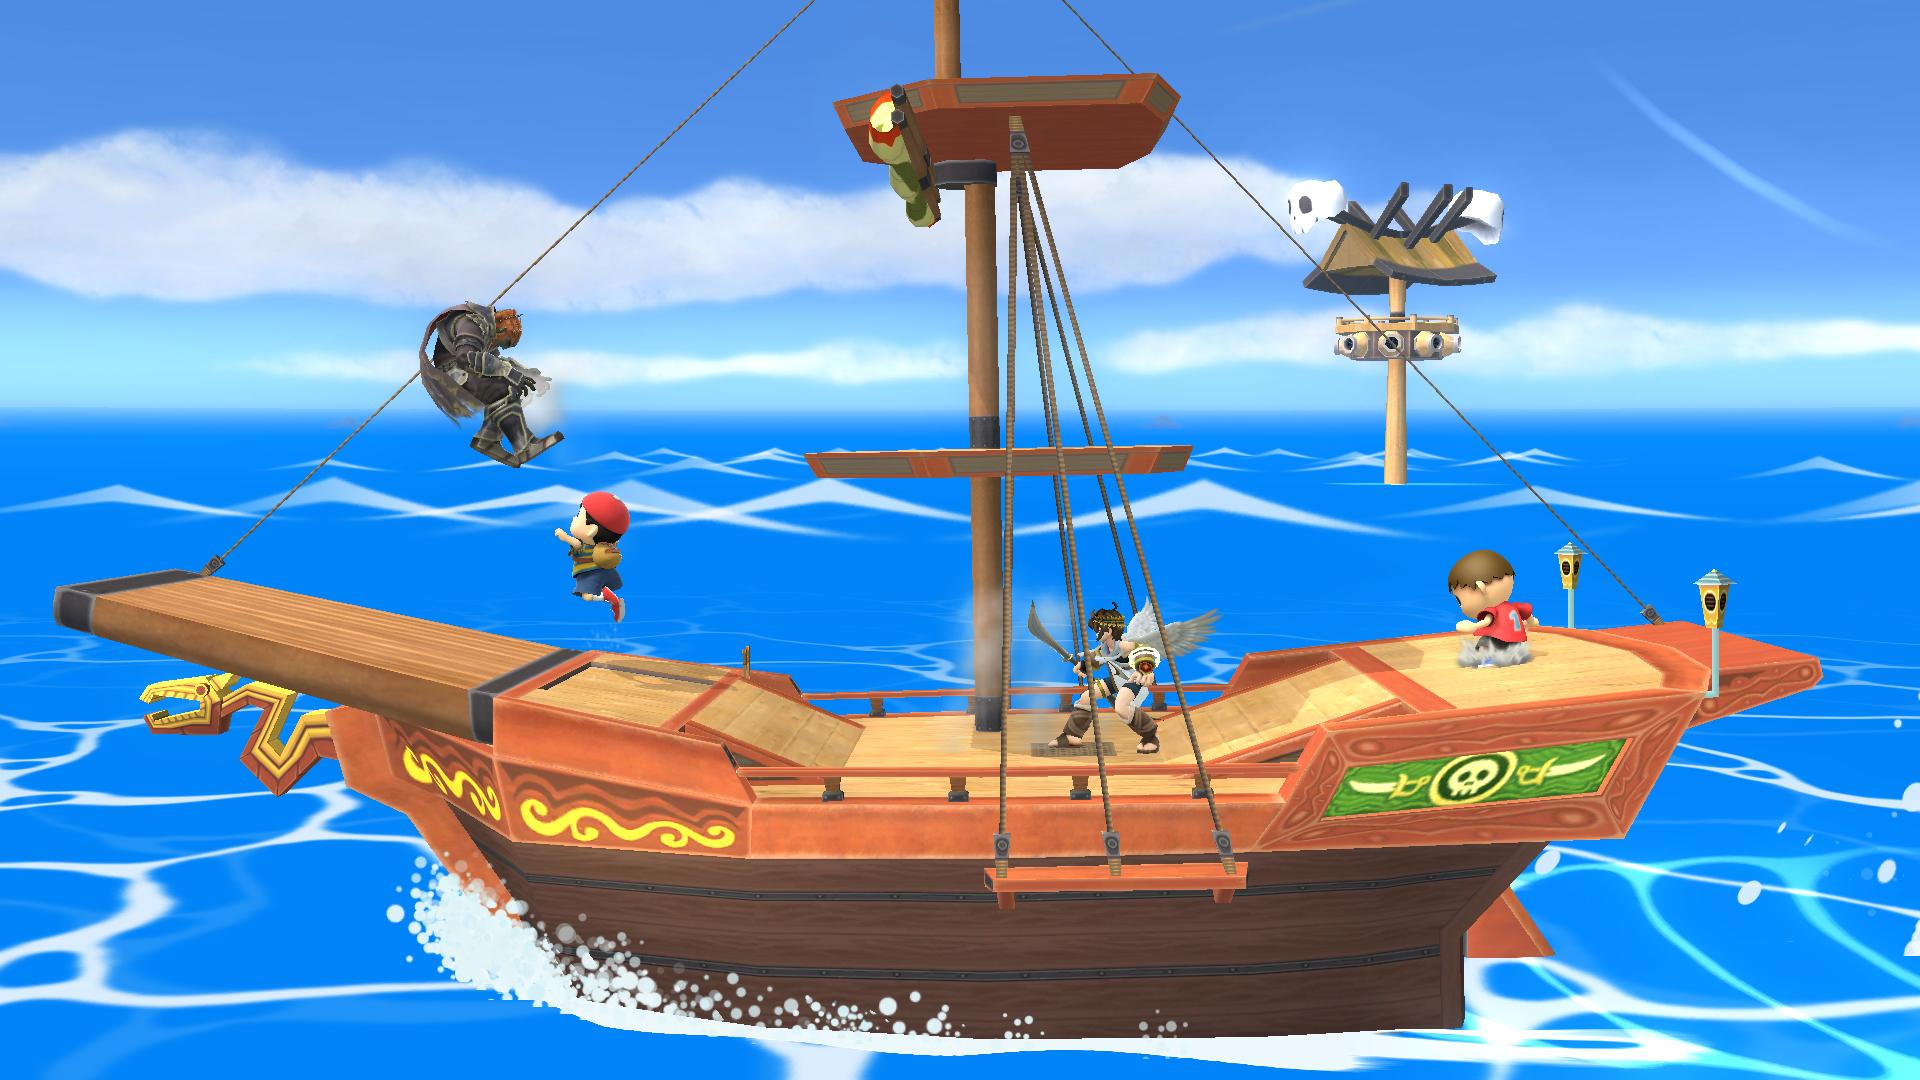 Super Mario Maker and Pirate Ship Stages Out Now for Super Smash Bros